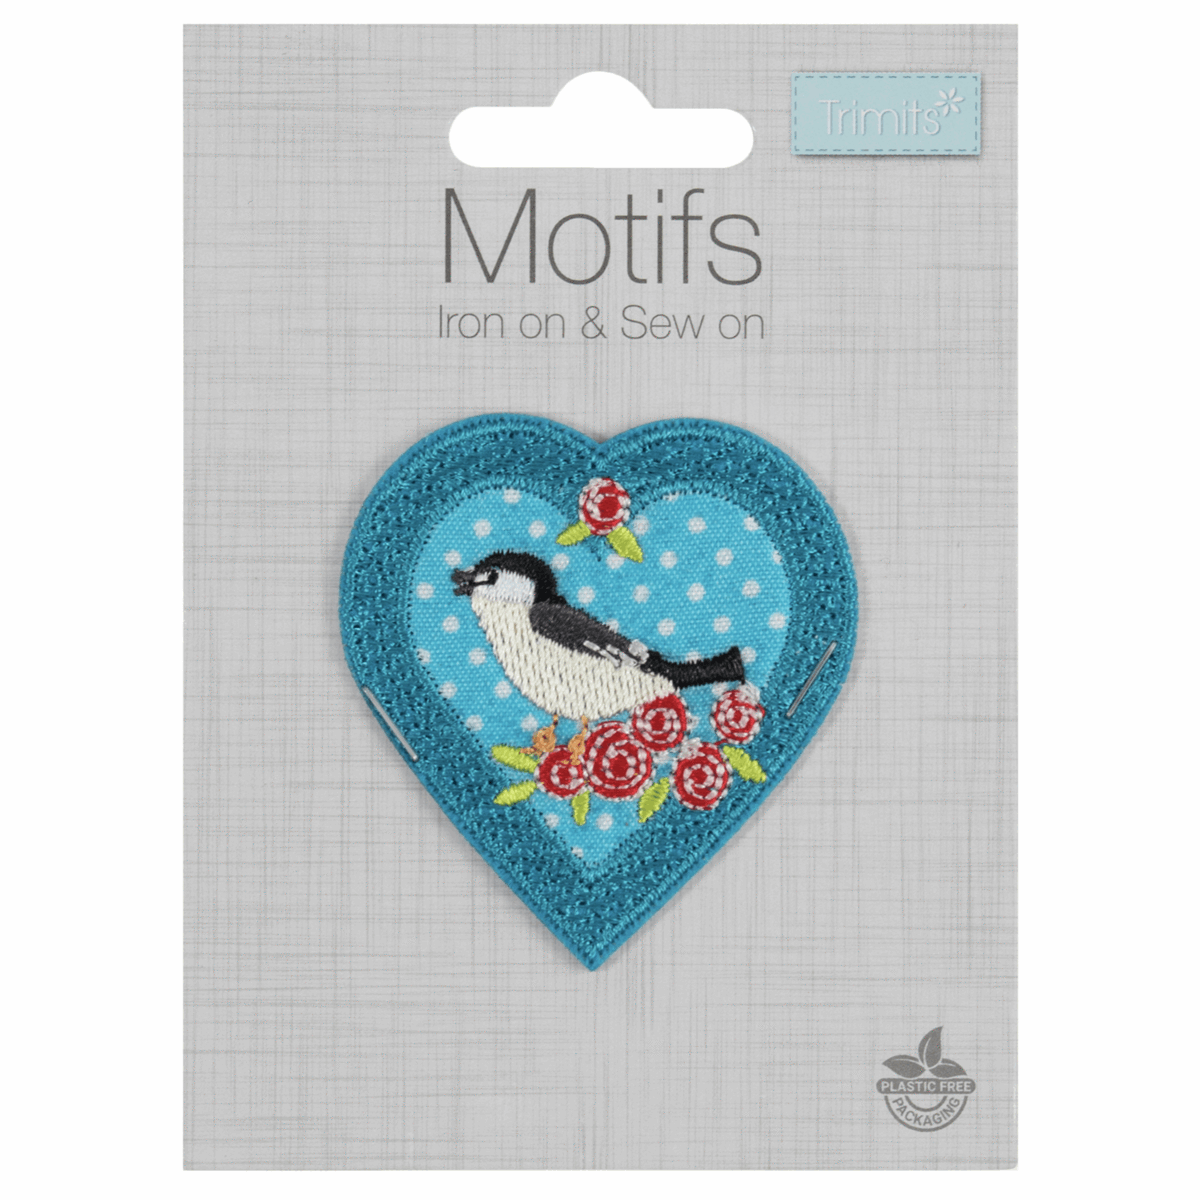 Trimits Iron-On/Sew On Motif Patch - Bird in Heart